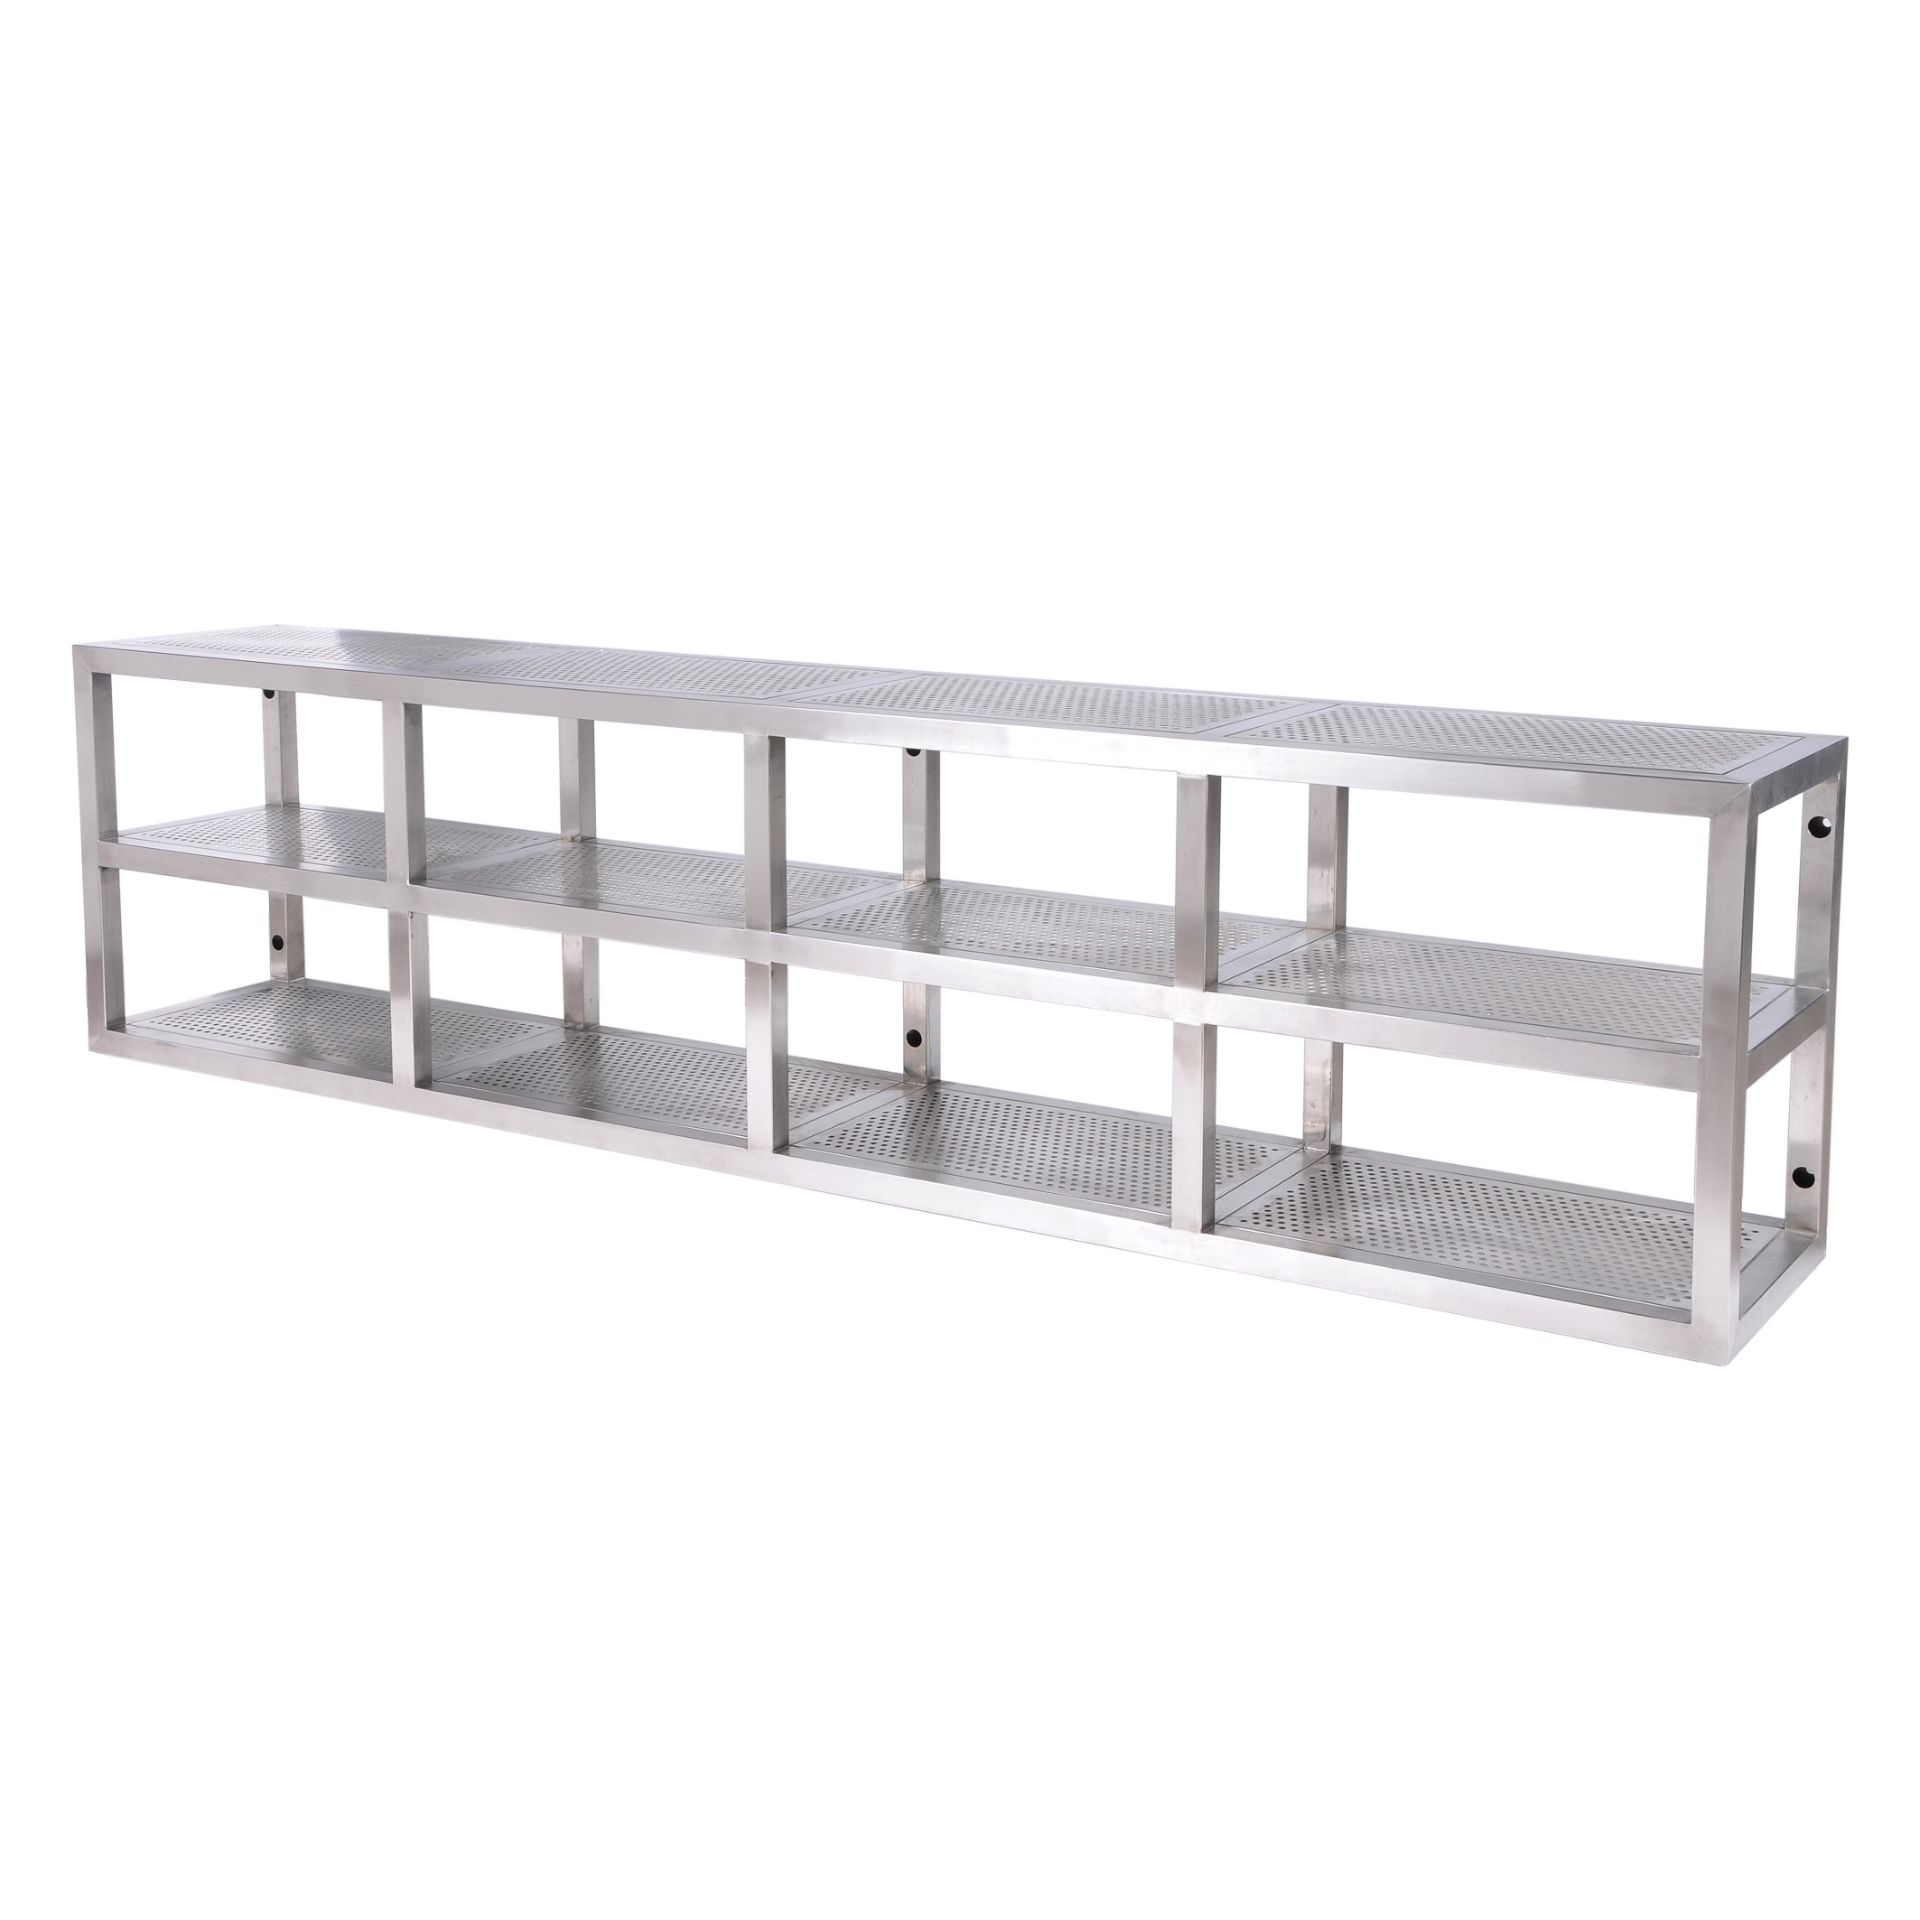 Kitchen Open Shelves Large Brushed Steel 240x40x60cm RRP £ 3375